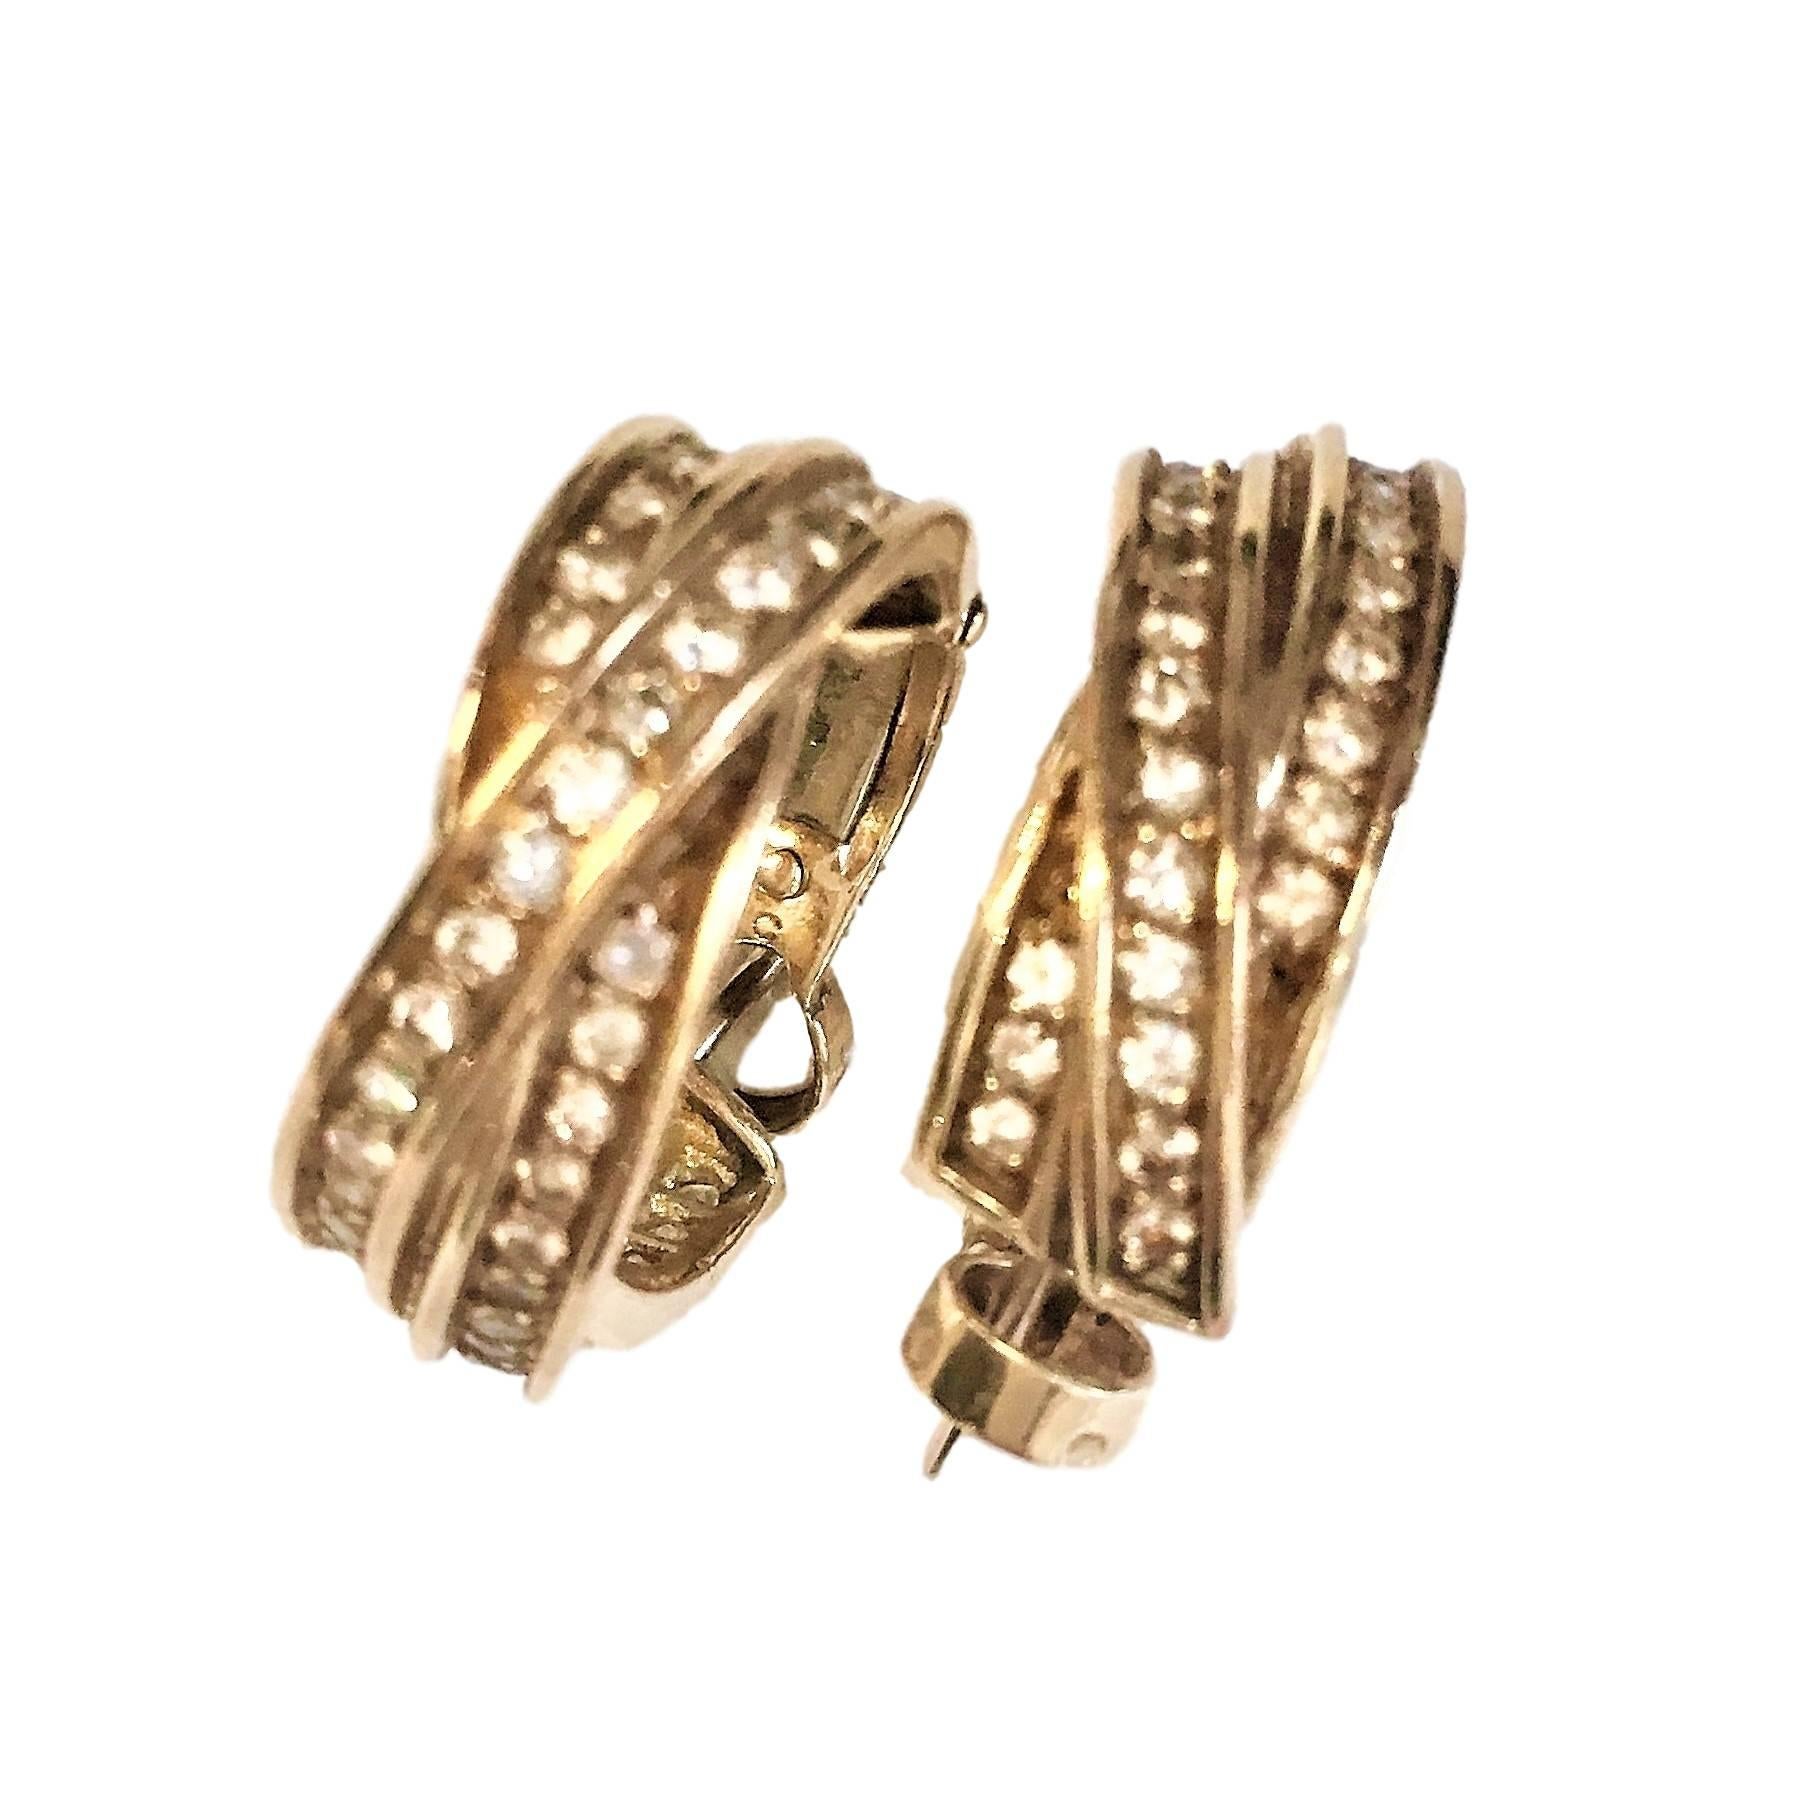 Pair of Cartier Diamond 18 Karat Yellow Gold Trinity Hoop Earrings In Excellent Condition For Sale In Neung-sur-beuvron, FR